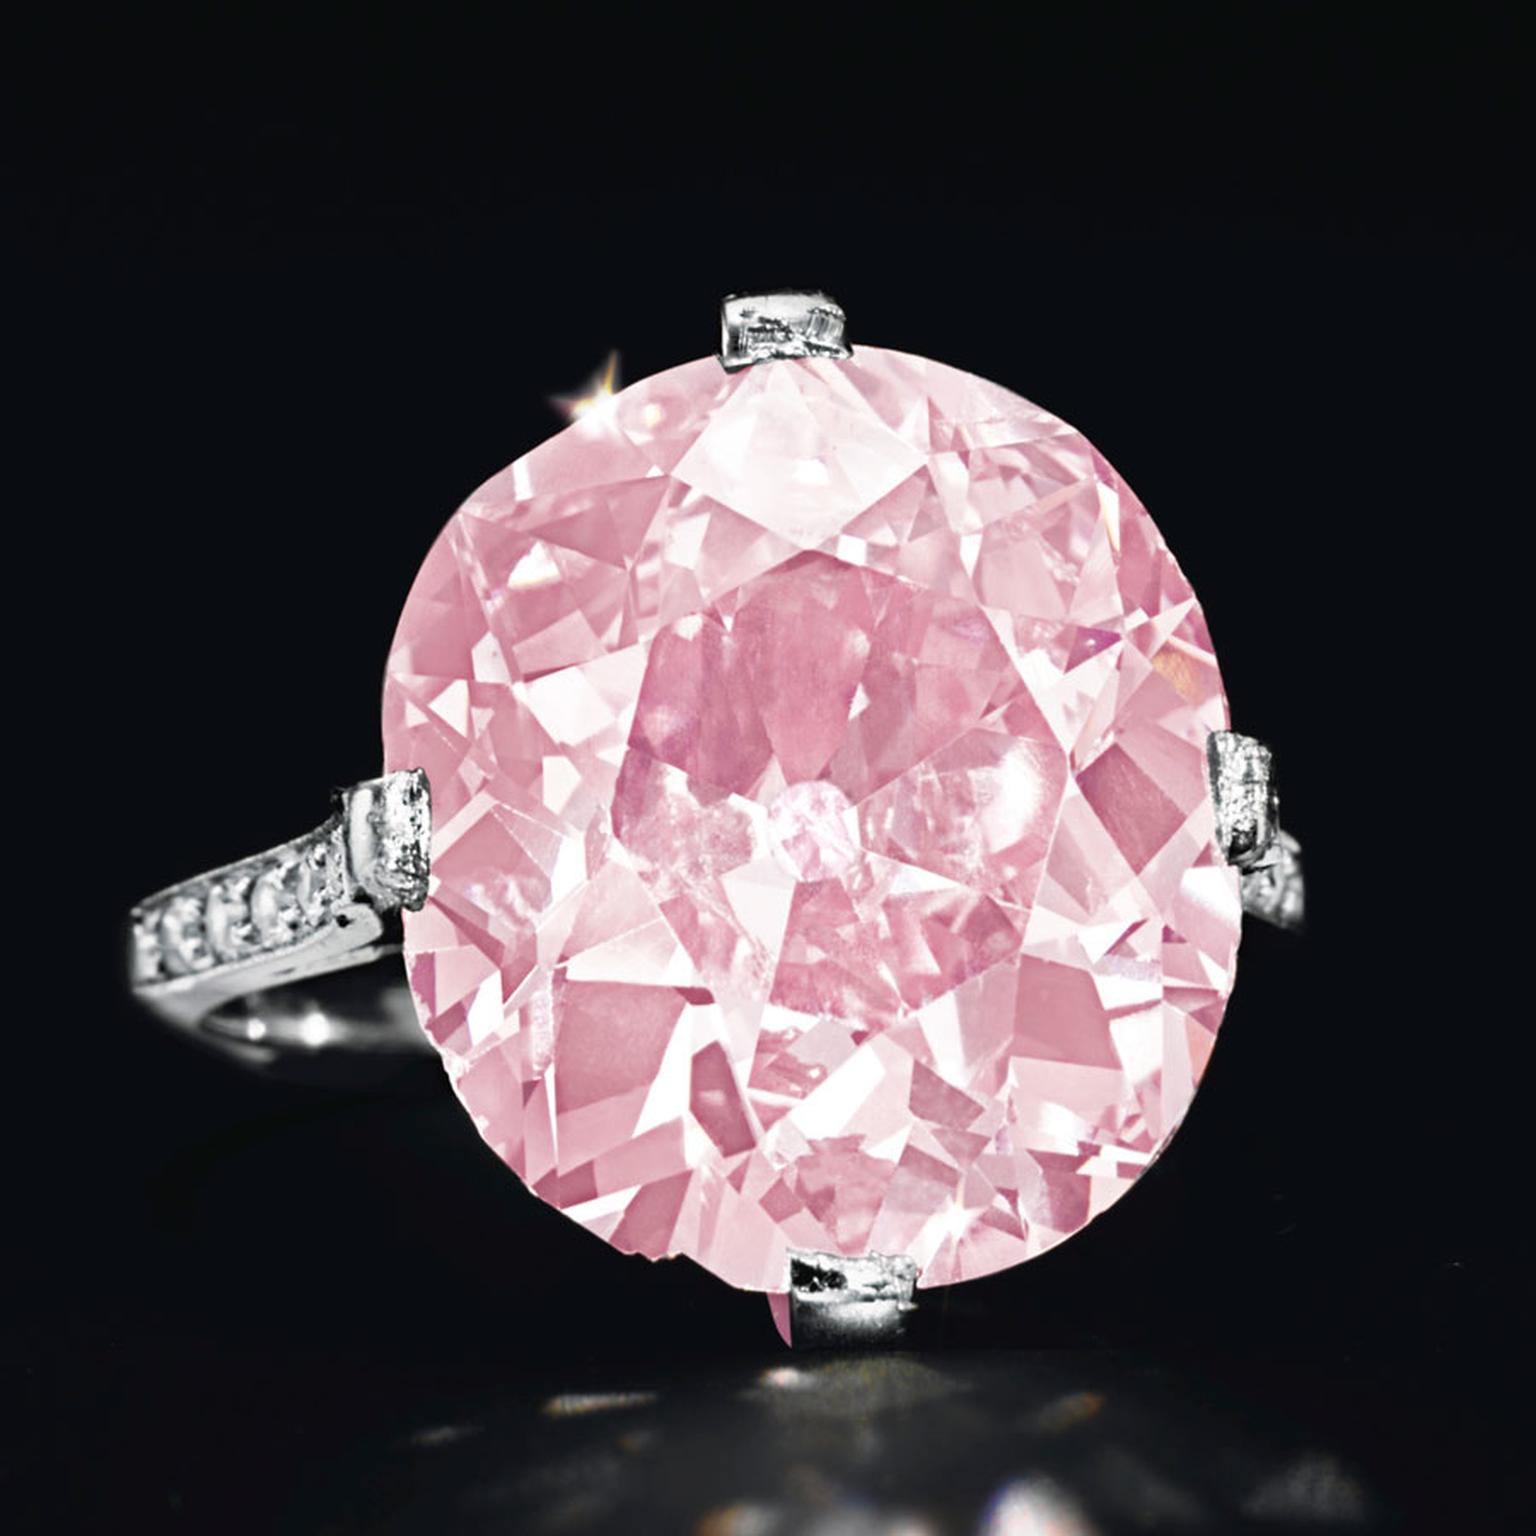 Christies lot 304 FROM THE ESTATE OF HUGUETTE M. CLARK A BELLE ÉPOQUE EXCEPTIONAL COLORED DIAMOND RING, BY DREICER & CO.